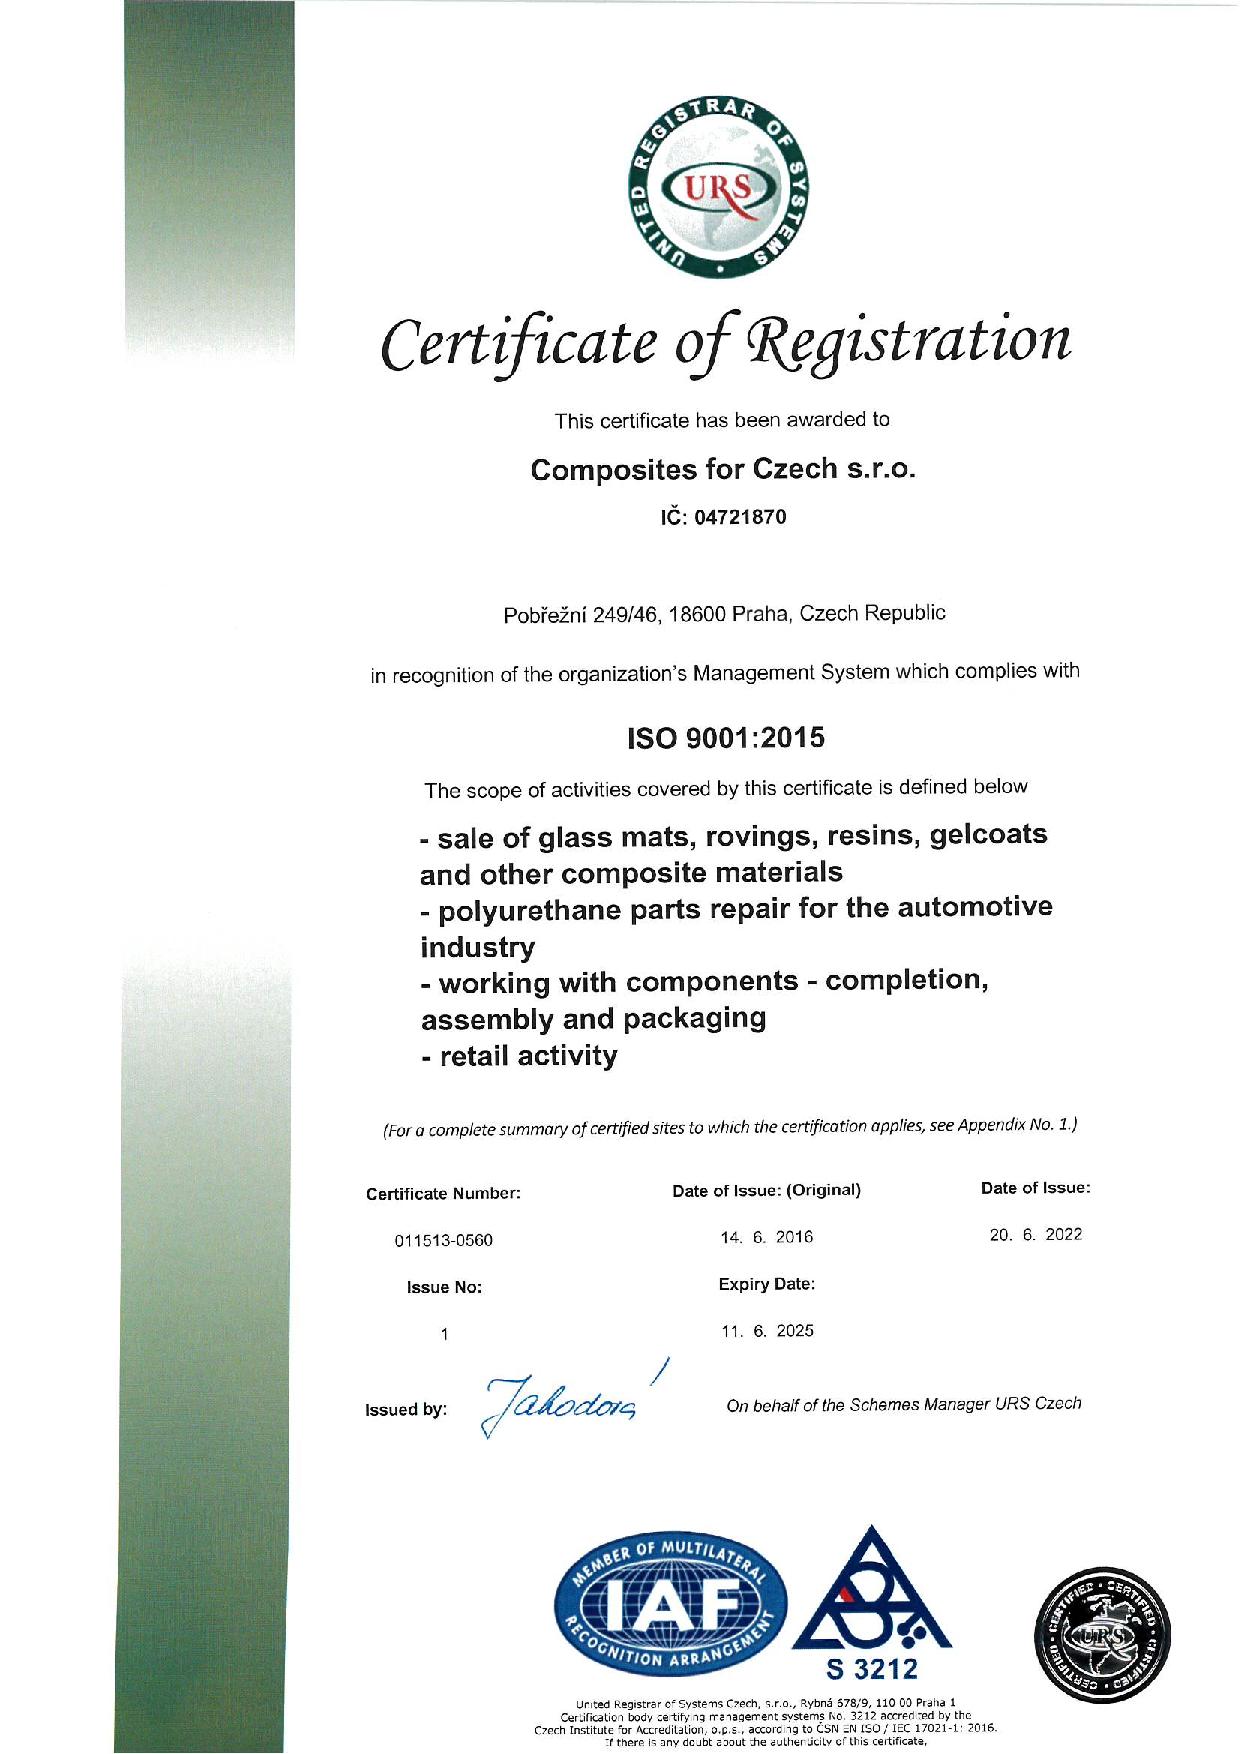 Composites for Czech s.r.o_cert ISO 9001 ENG-page-001.jpg